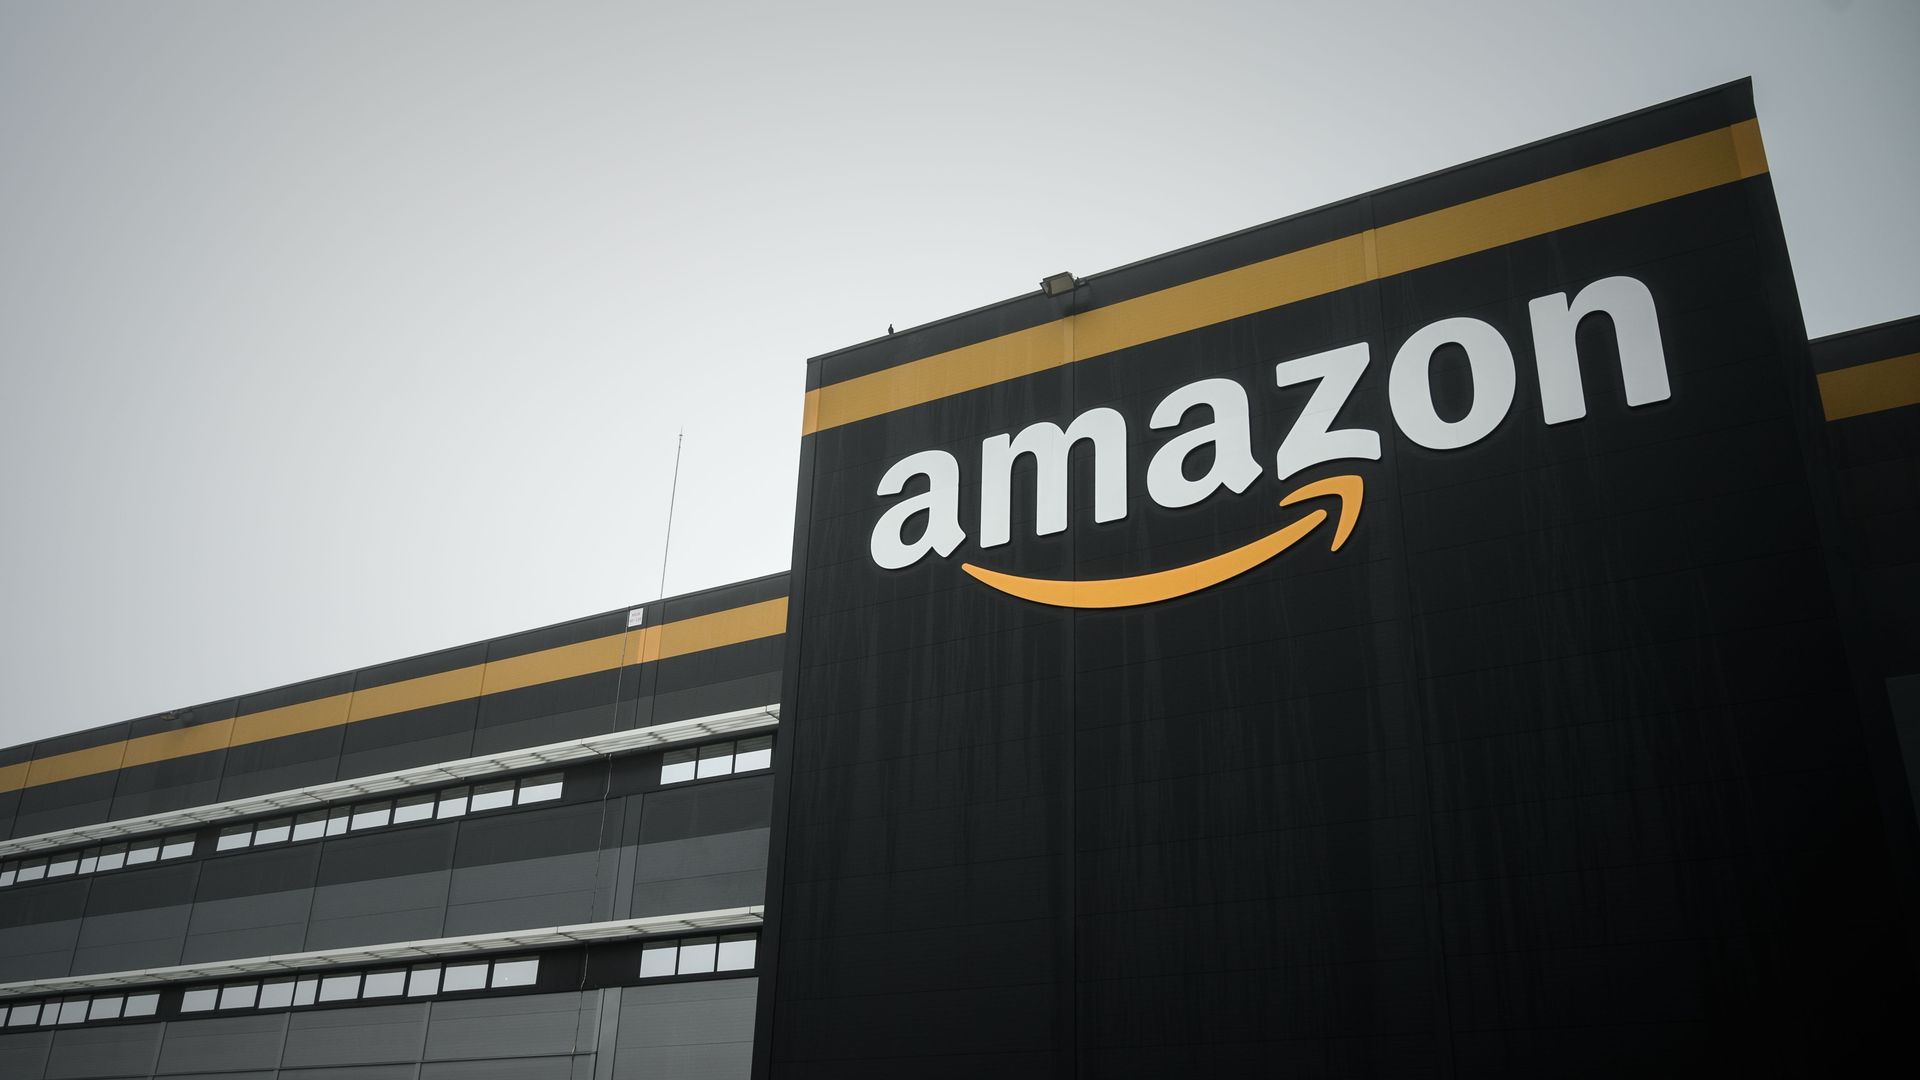 A photo of a building with Amazon's name and logo on it